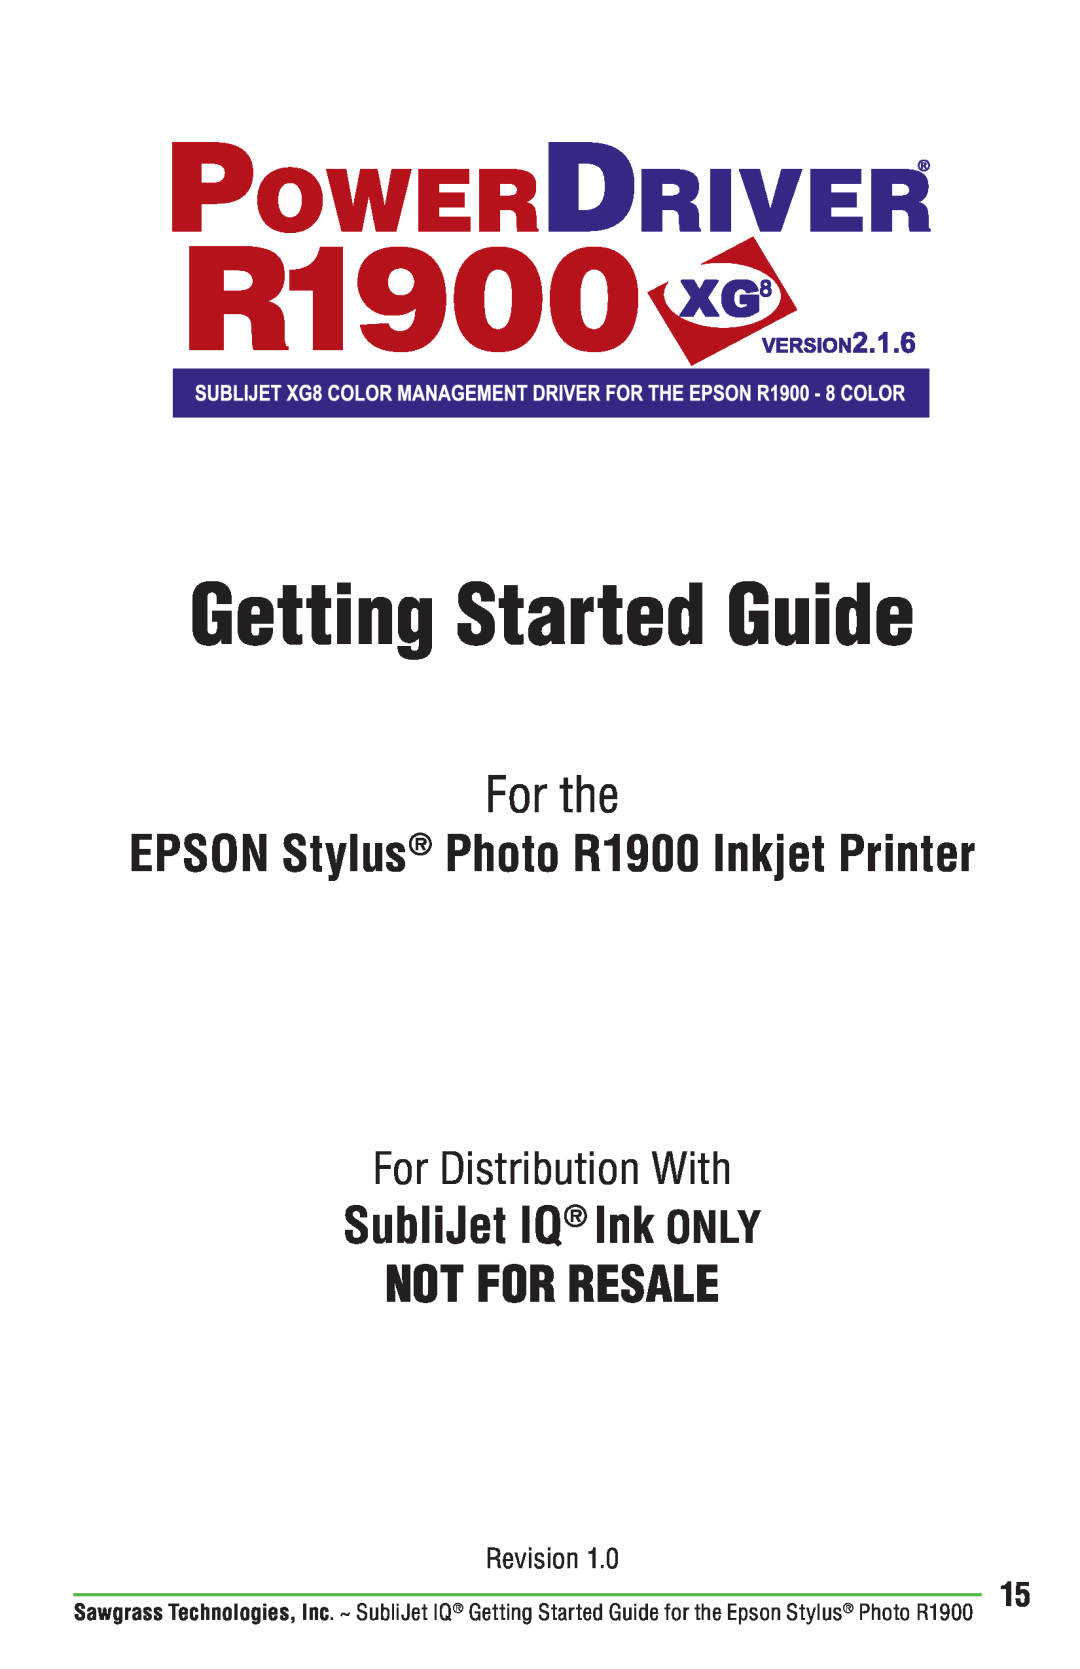 Epson SubliJet IQ Ink ONLY, Getting Started Guide, For the, Not For Resale, EPSON Stylus Photo R1900 Inkjet Printer 